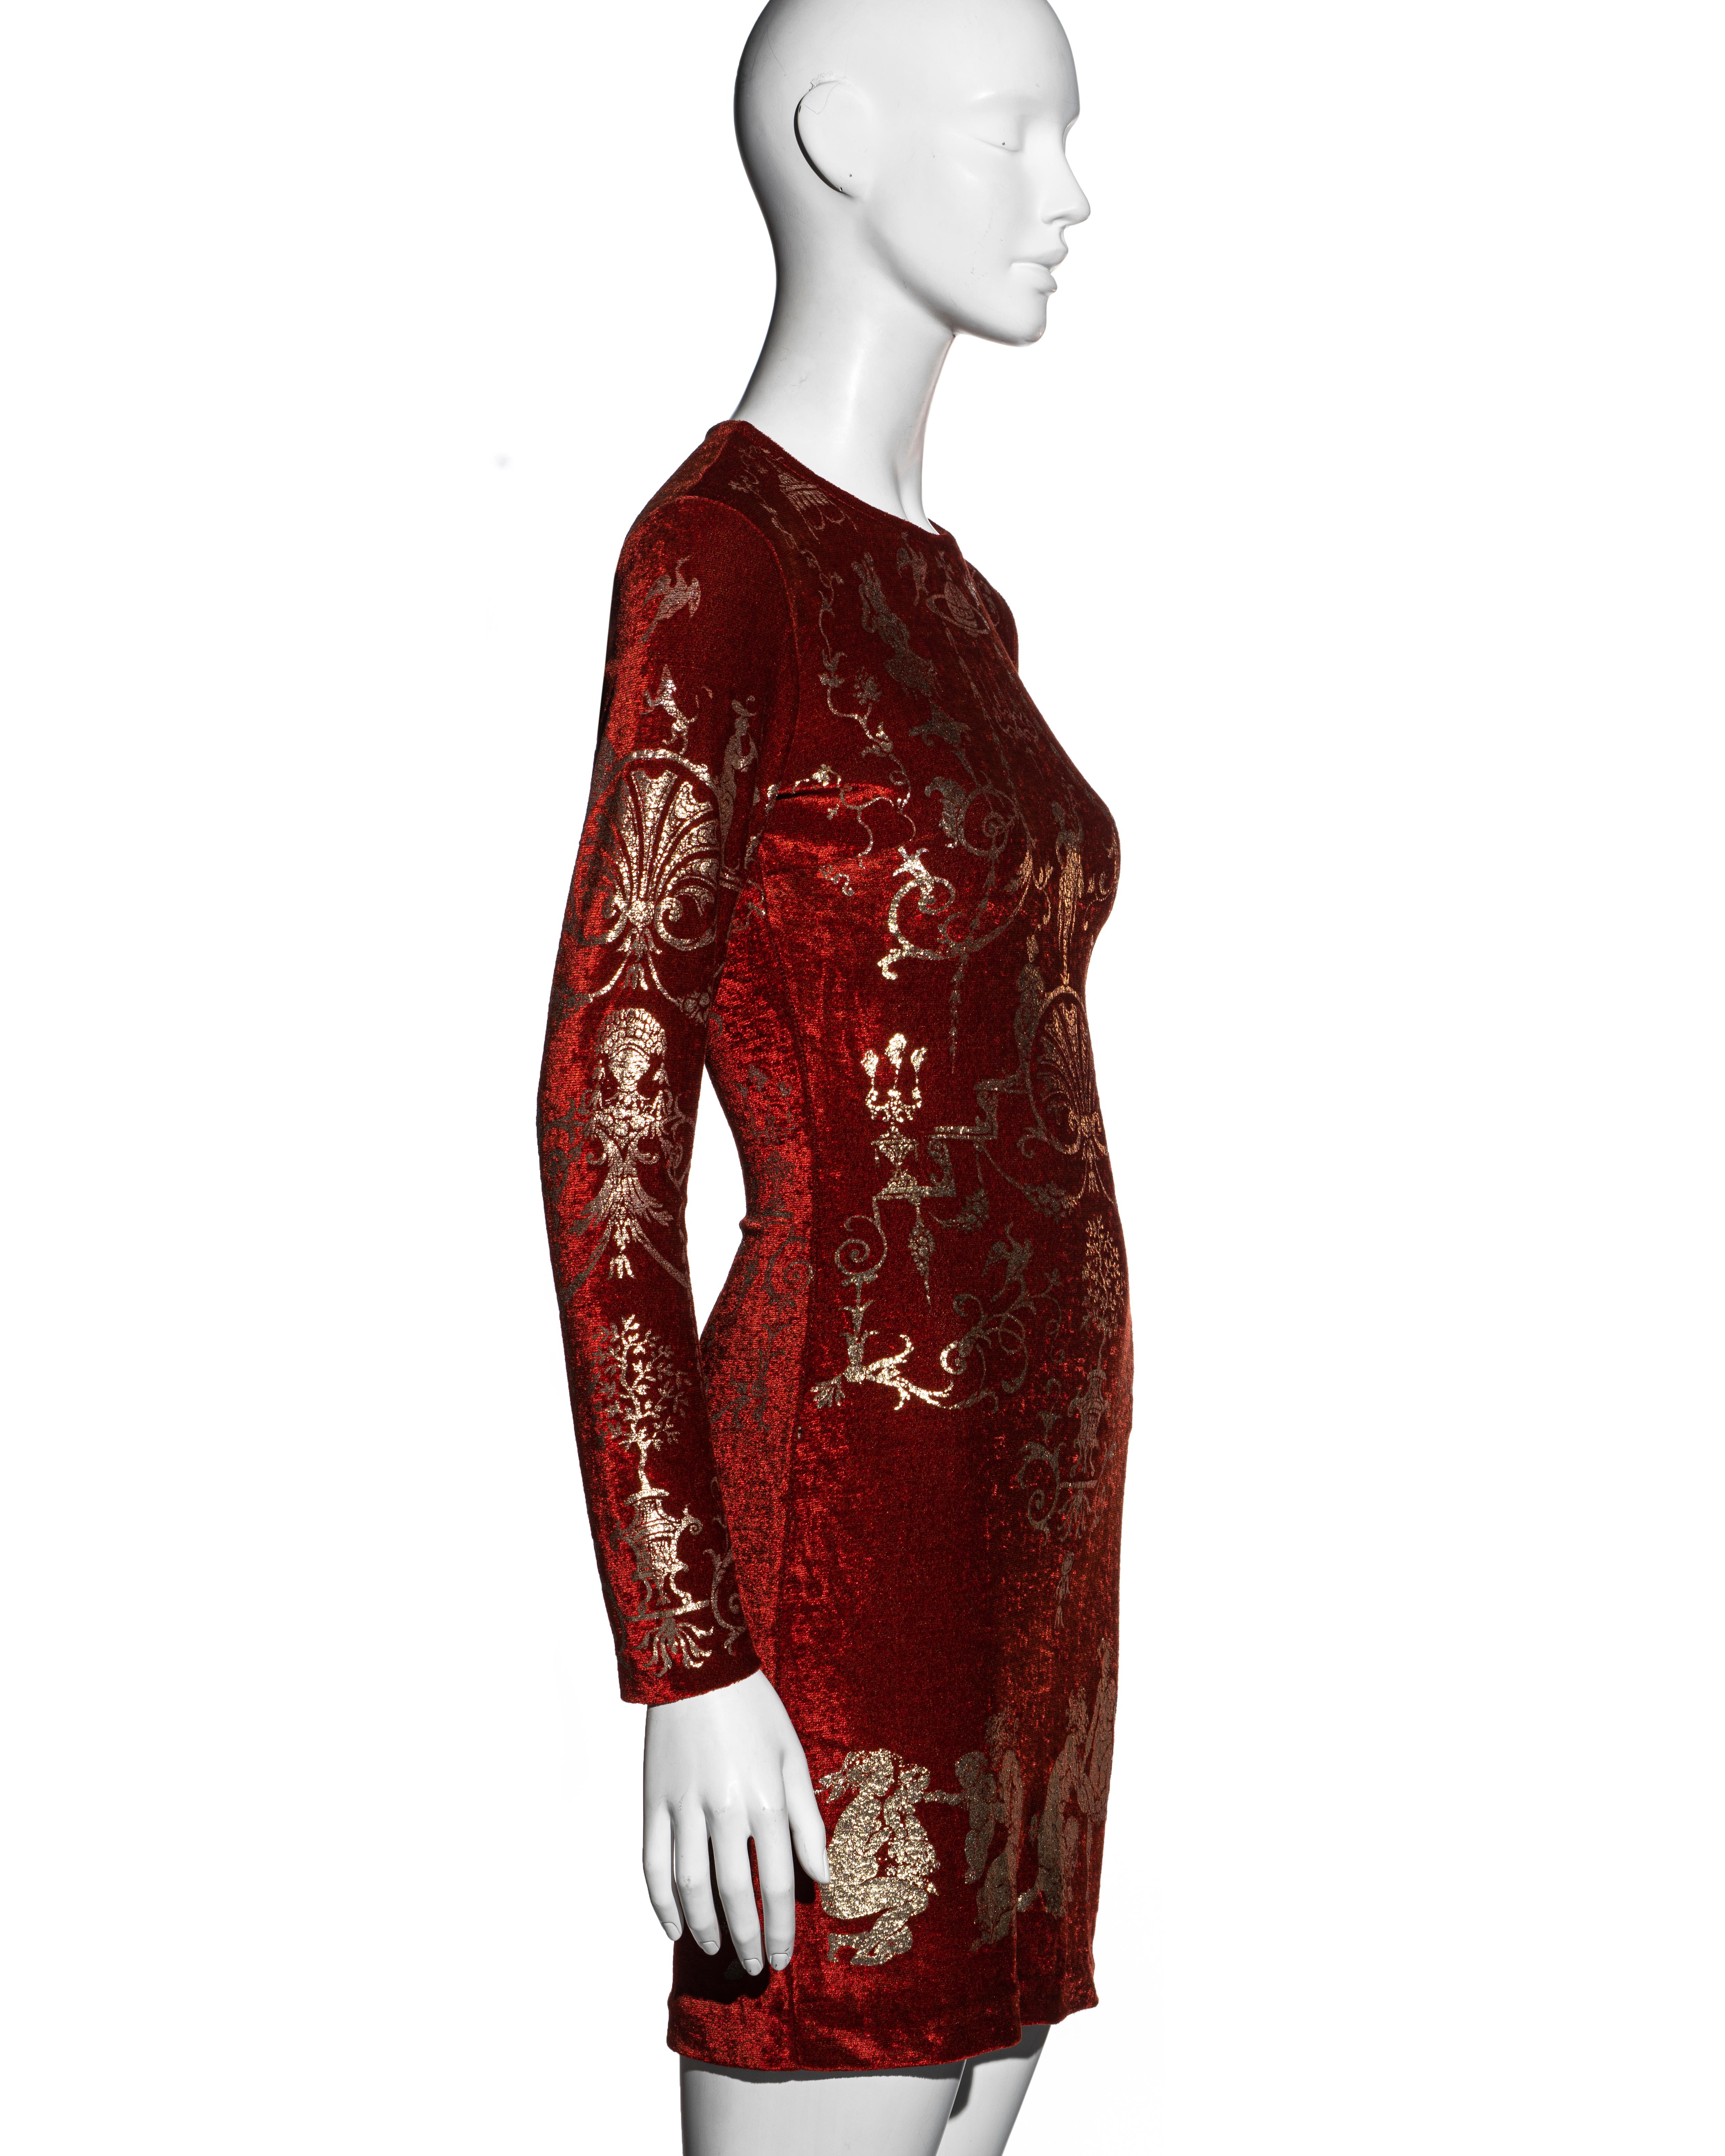 Red Vivienne Westwood red velvet bodycon dress with gold foil print, fw 1991